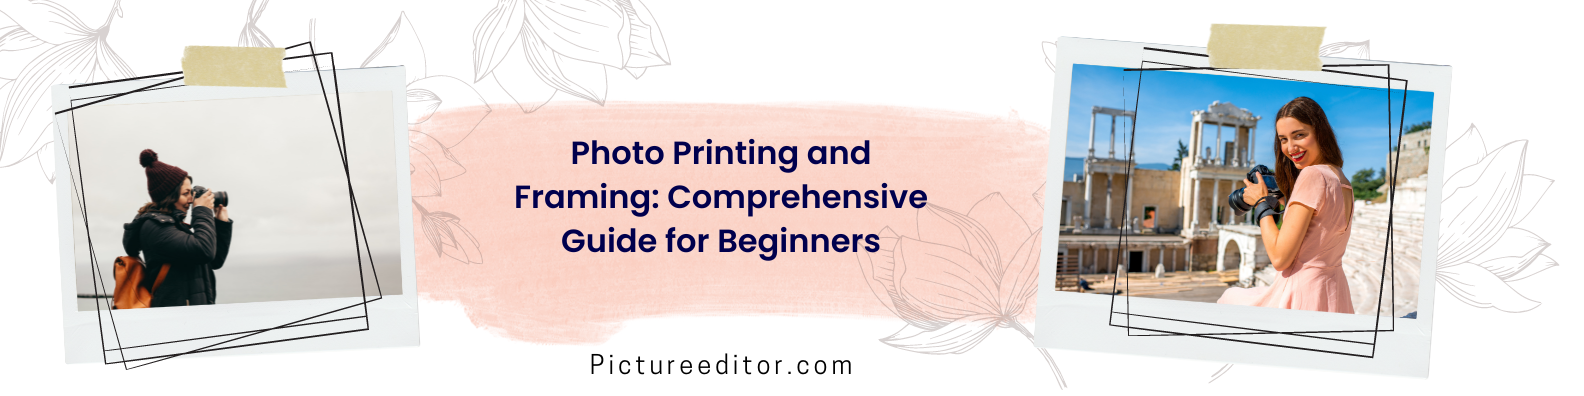 Photo Printing and Framing Comprehensive Guide for Beginners